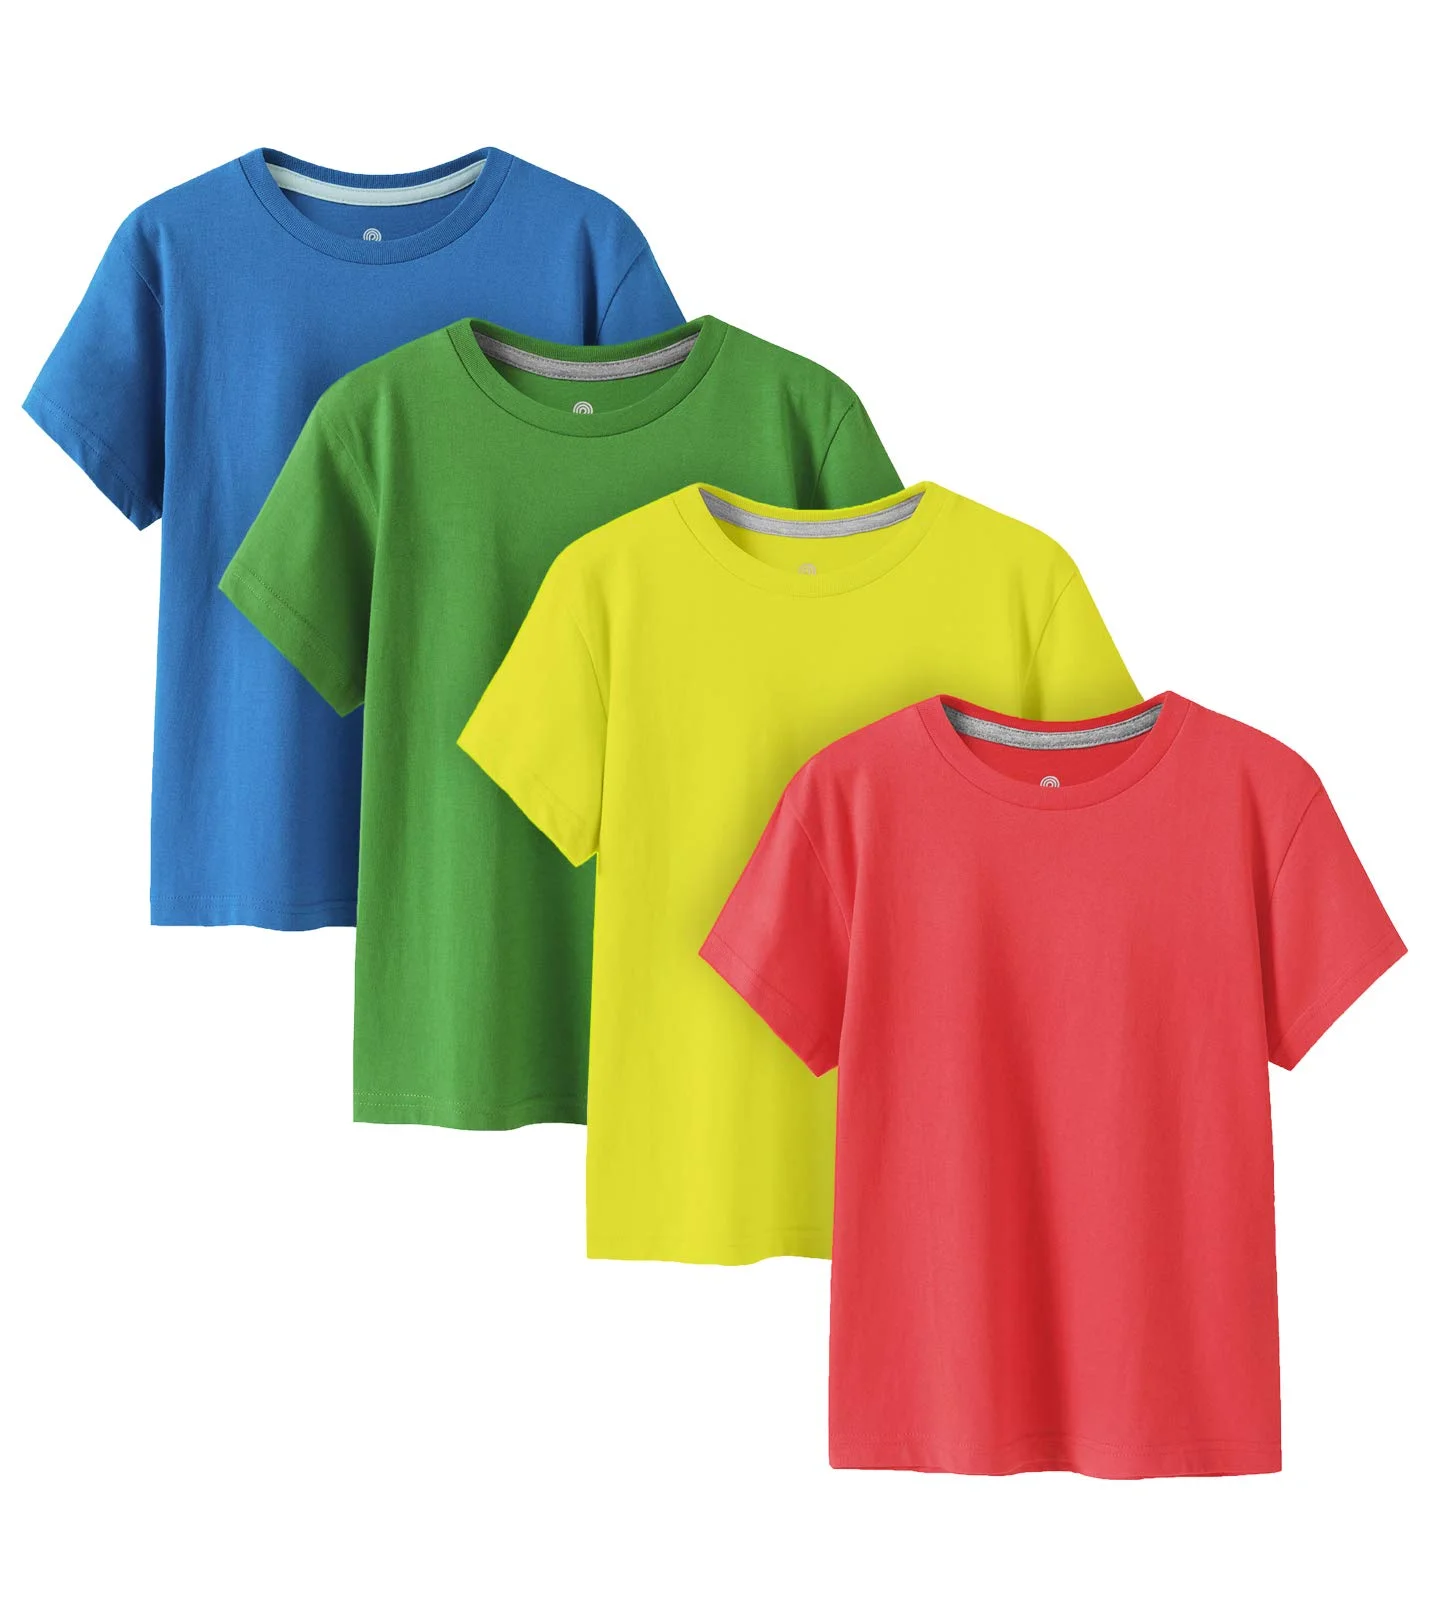 School V-neck T-shirts - Bangladesh Factory, Suppliers, Manufacturers